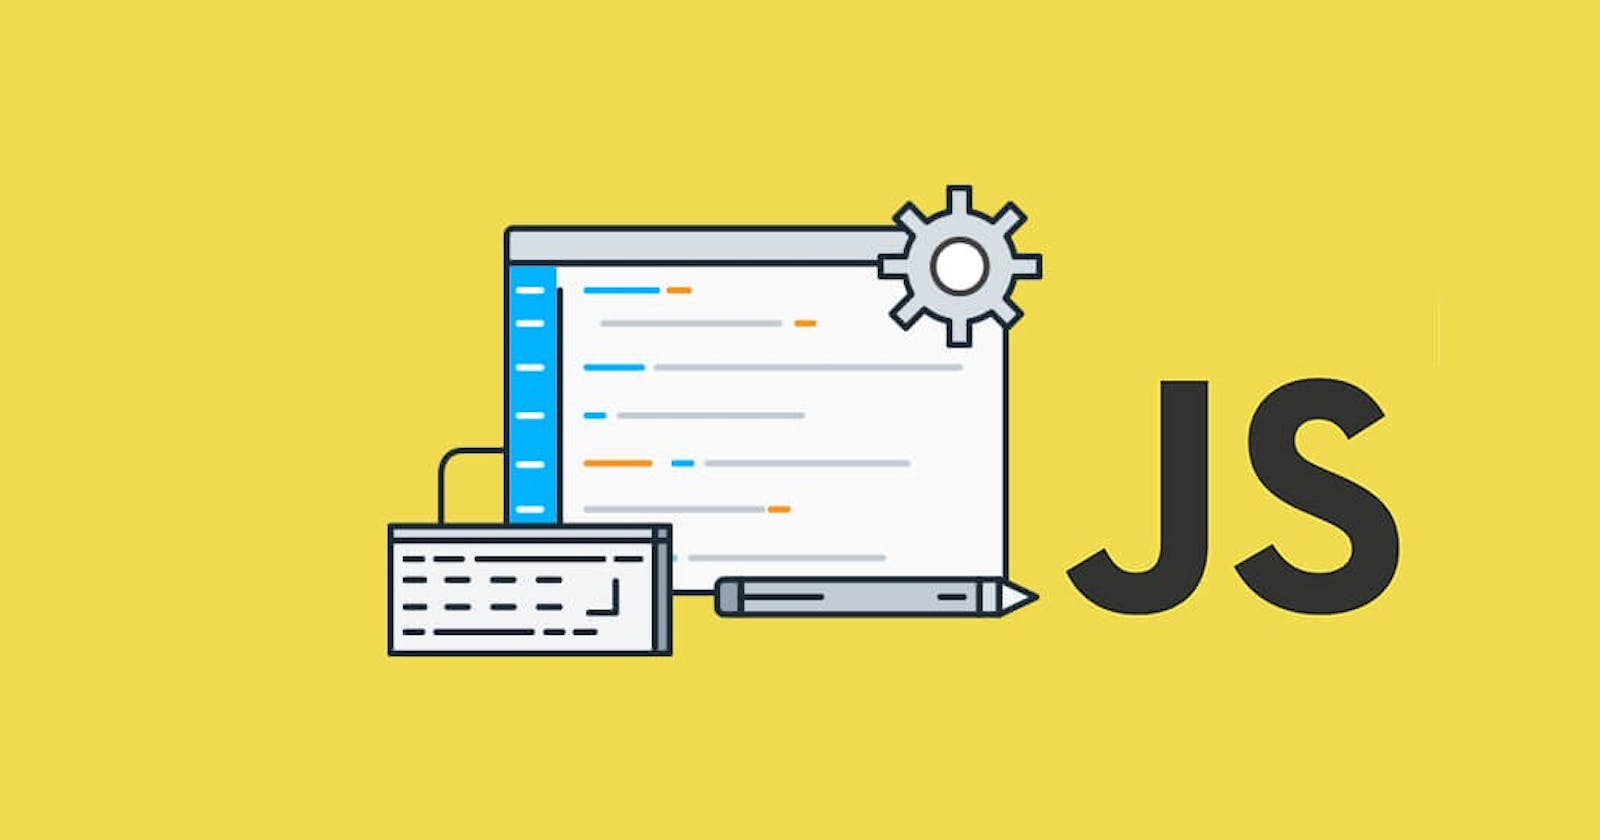 How To Update URL Parameters In Javascript Without Reloading?